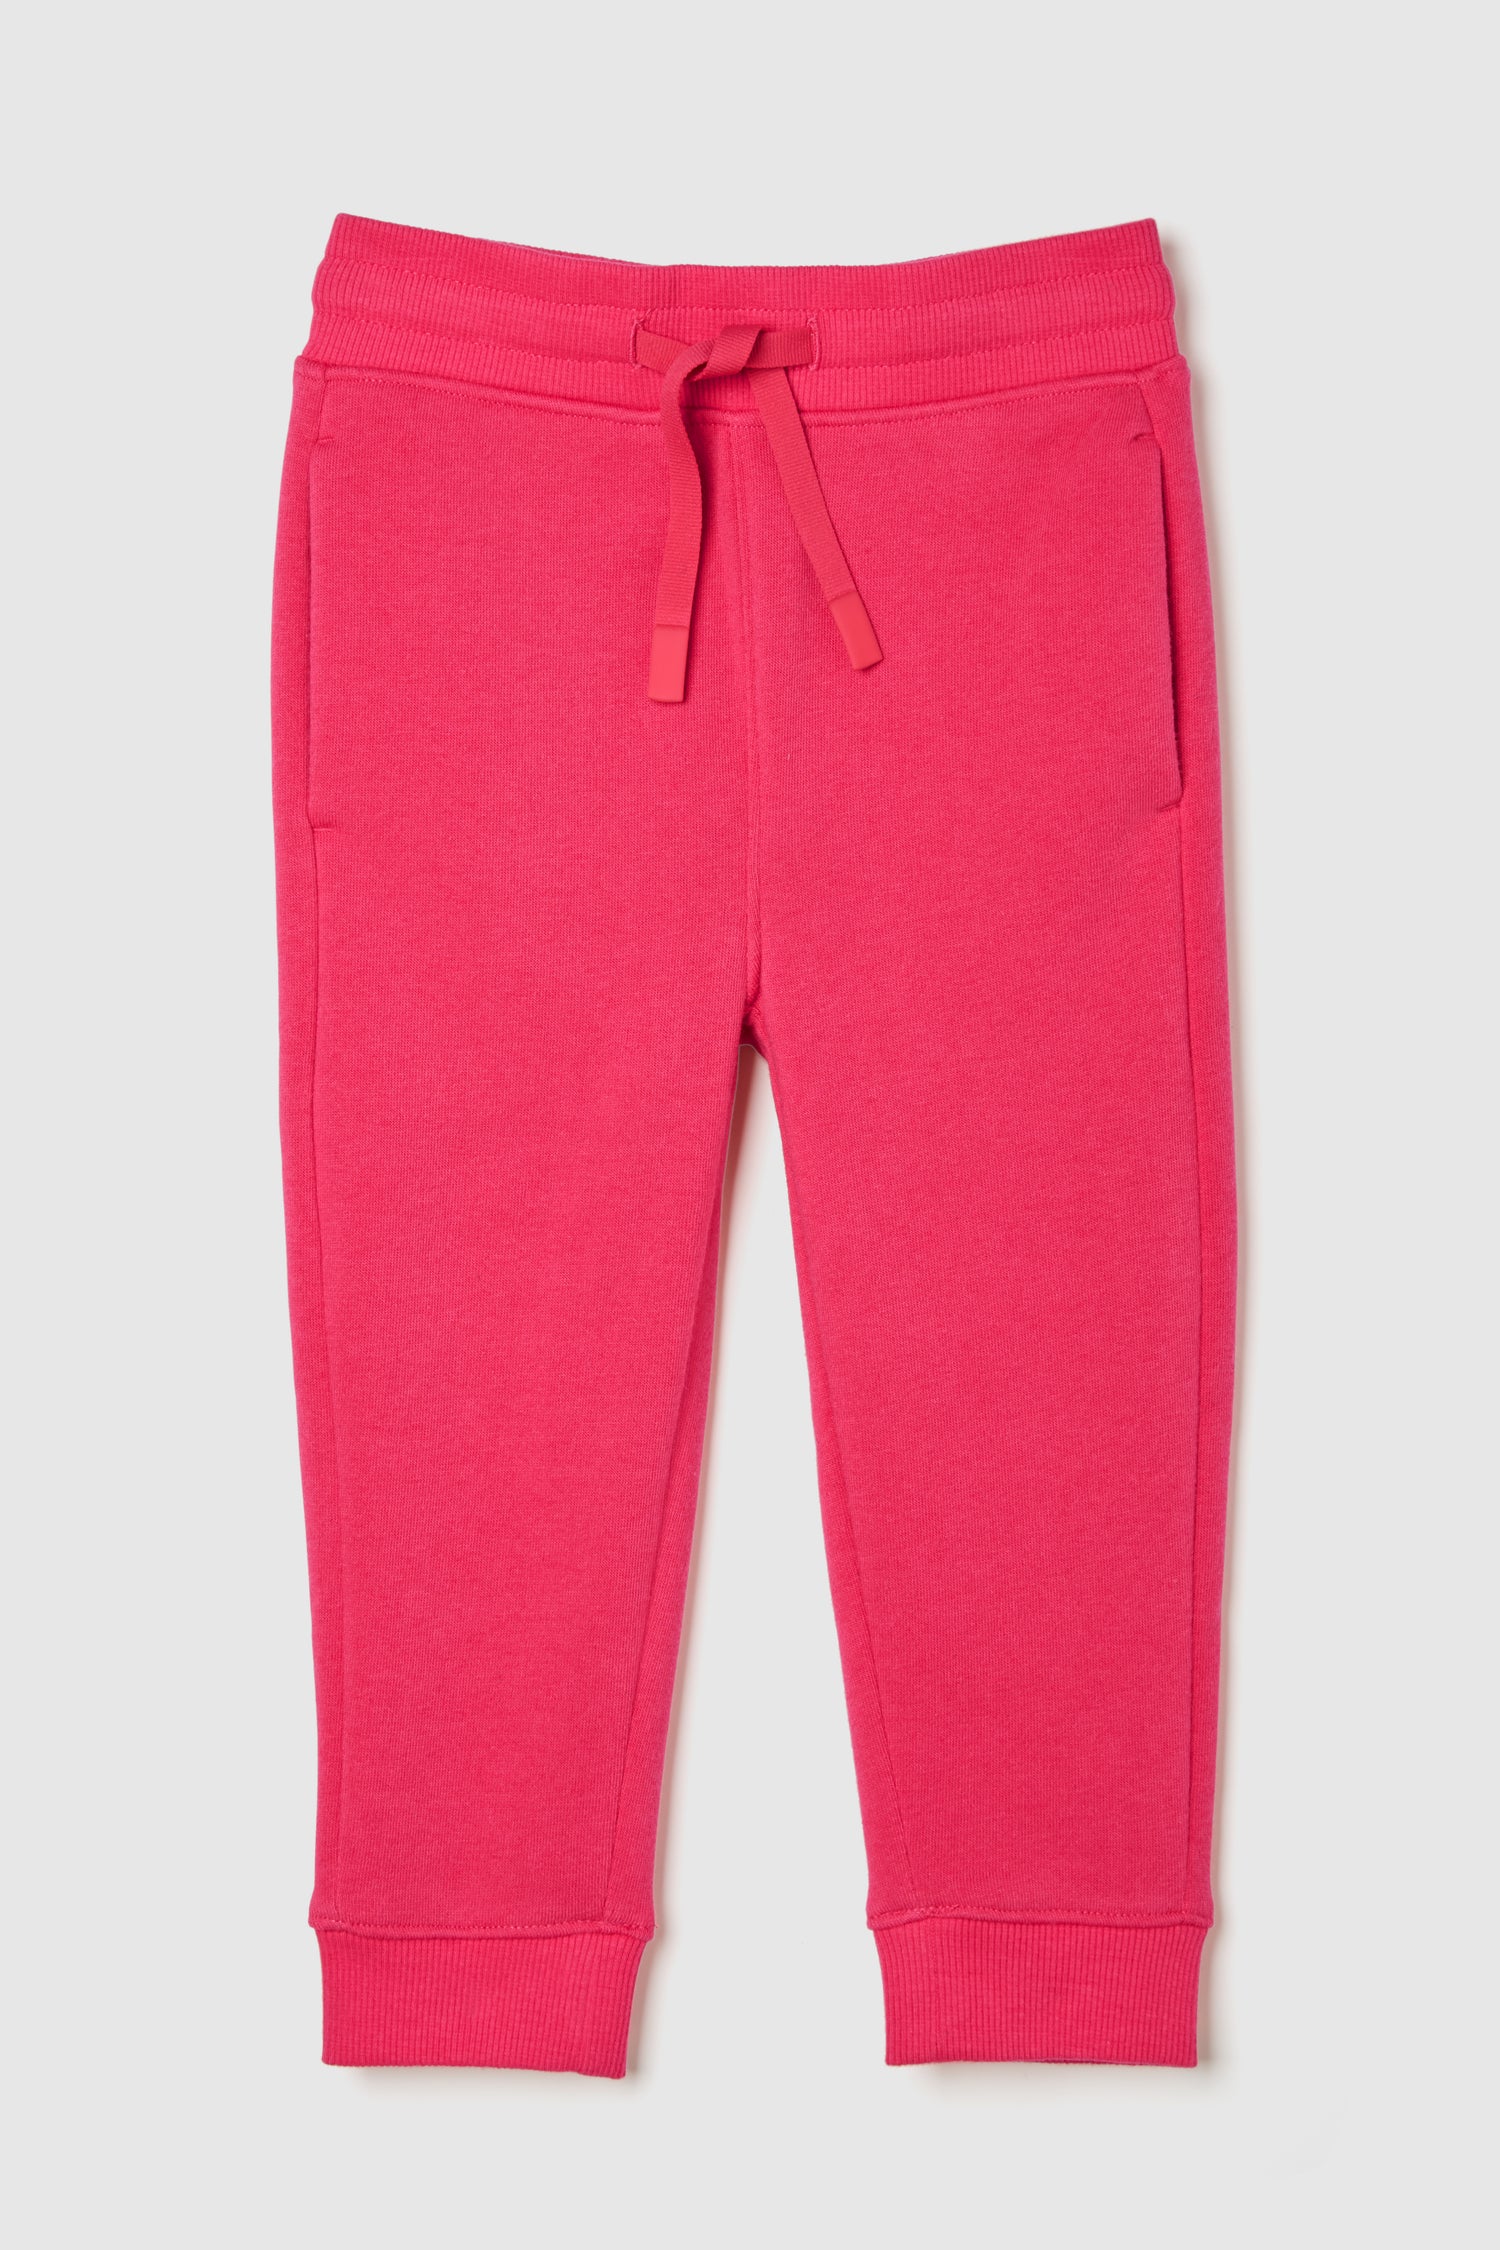 FWD Kids' Toddler Girls' 2-6 All Year Joggers Pants Casual | Hillcrest Mall